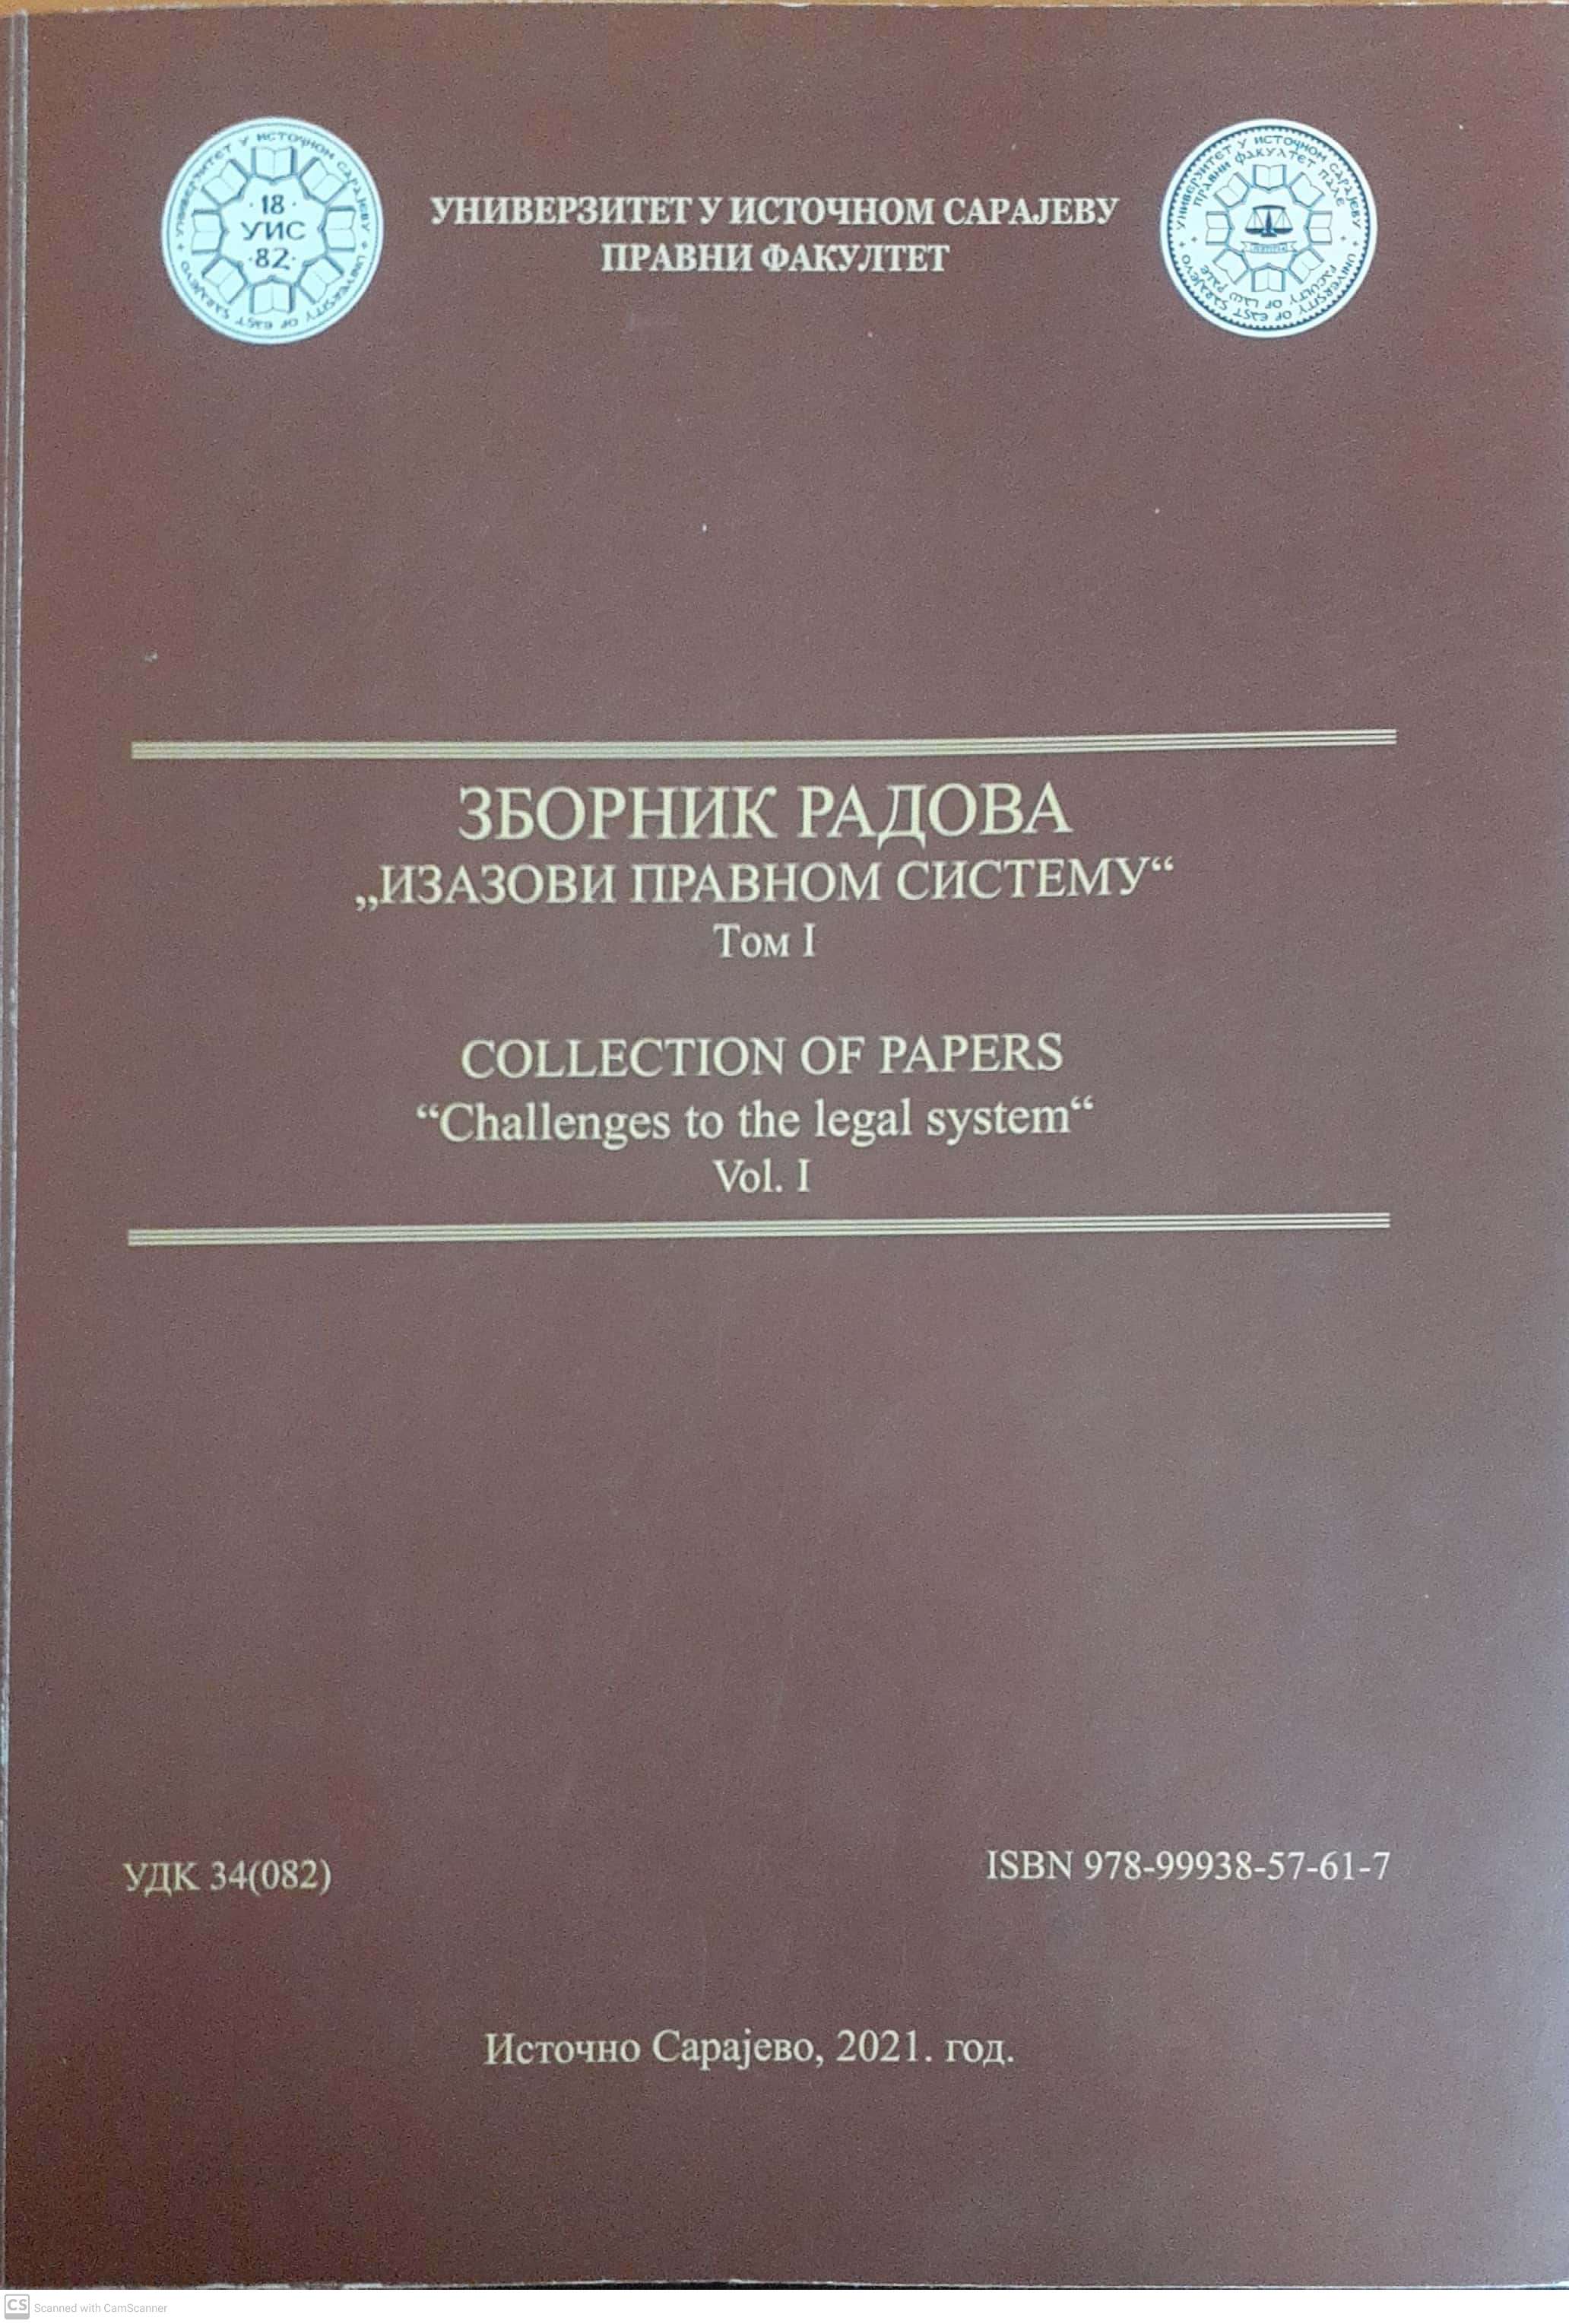 Collection of papers "Challenges to the Legal System" Vol I